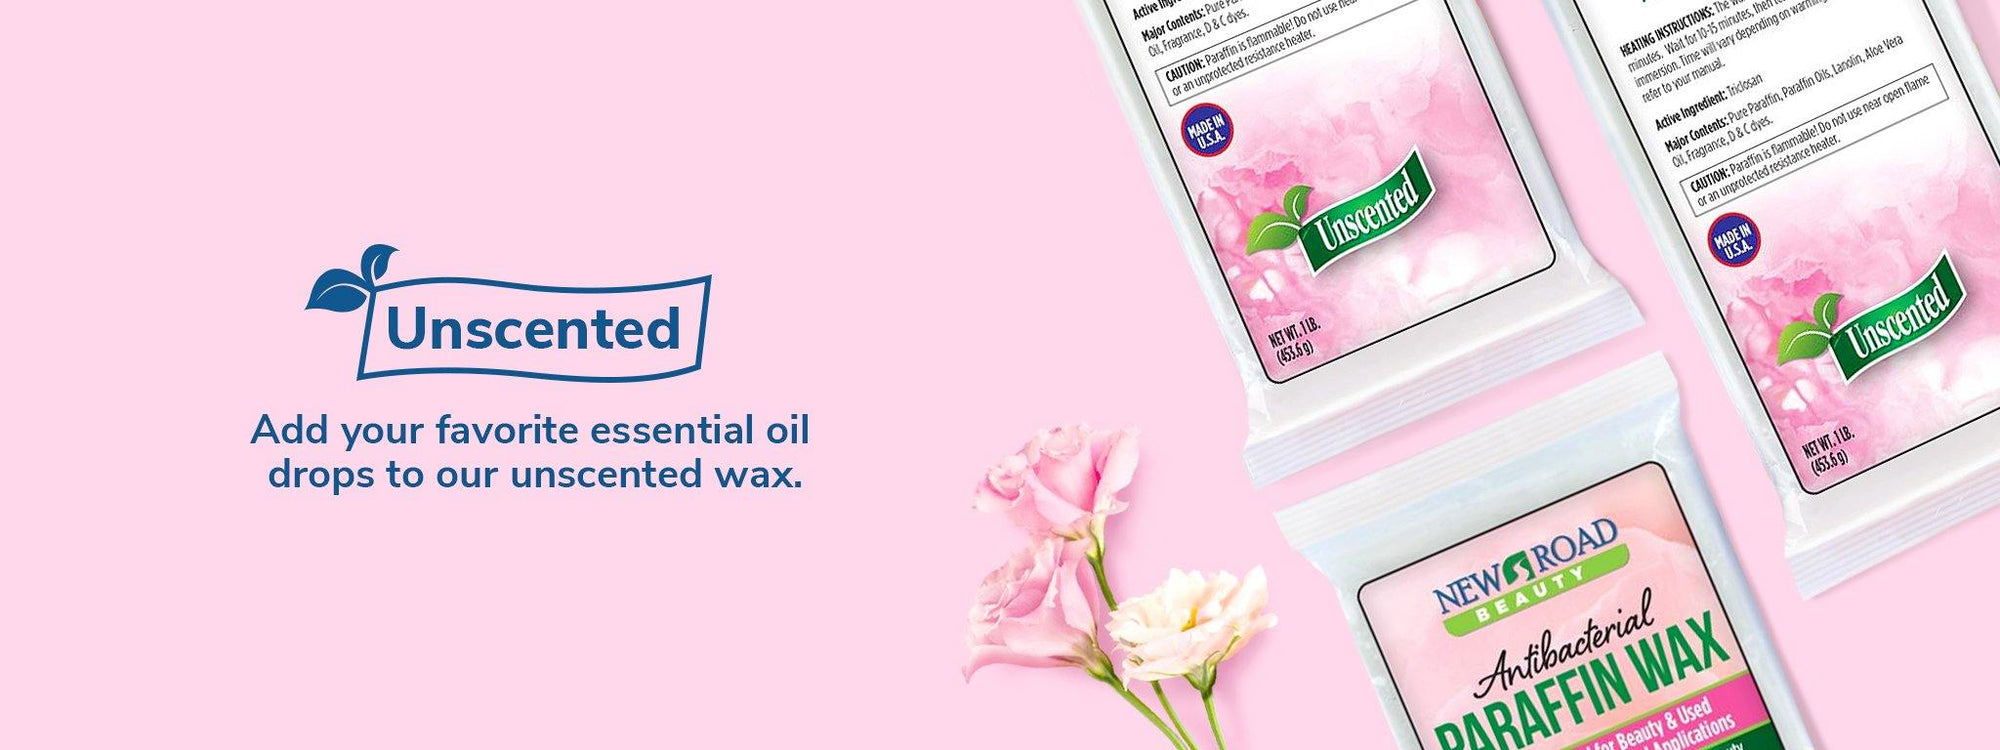 Unscented Paraffin Wax - New Road Beauty